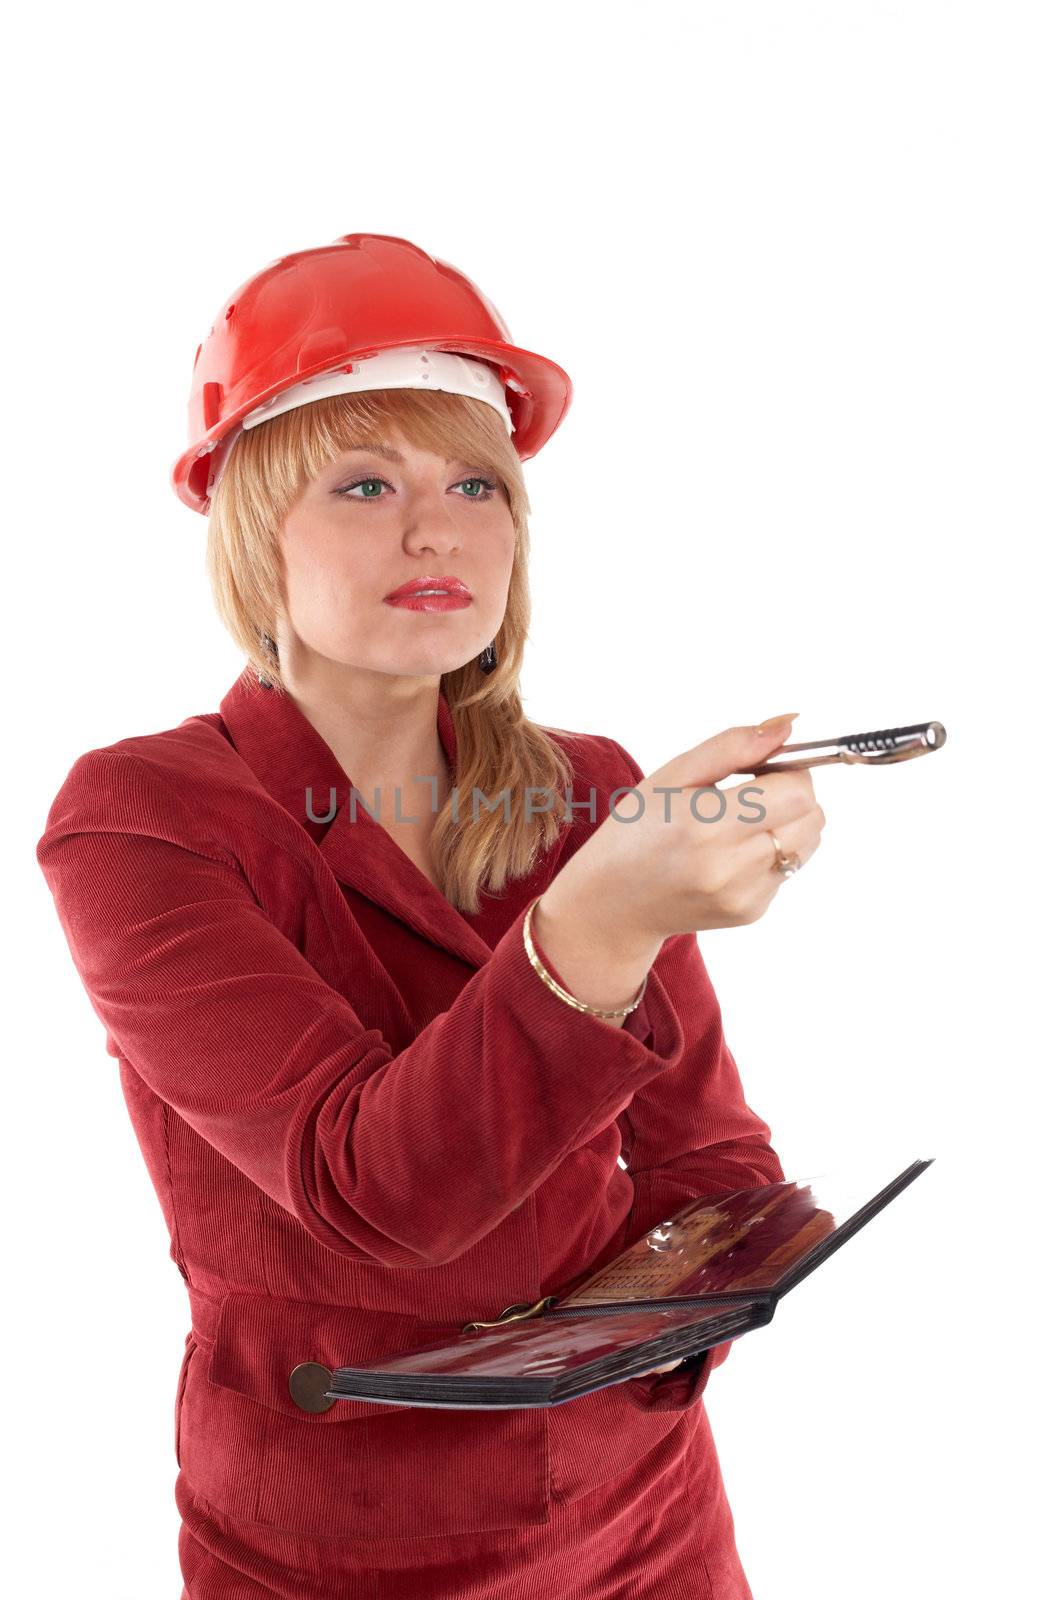 An image of lady writing something in her notebook